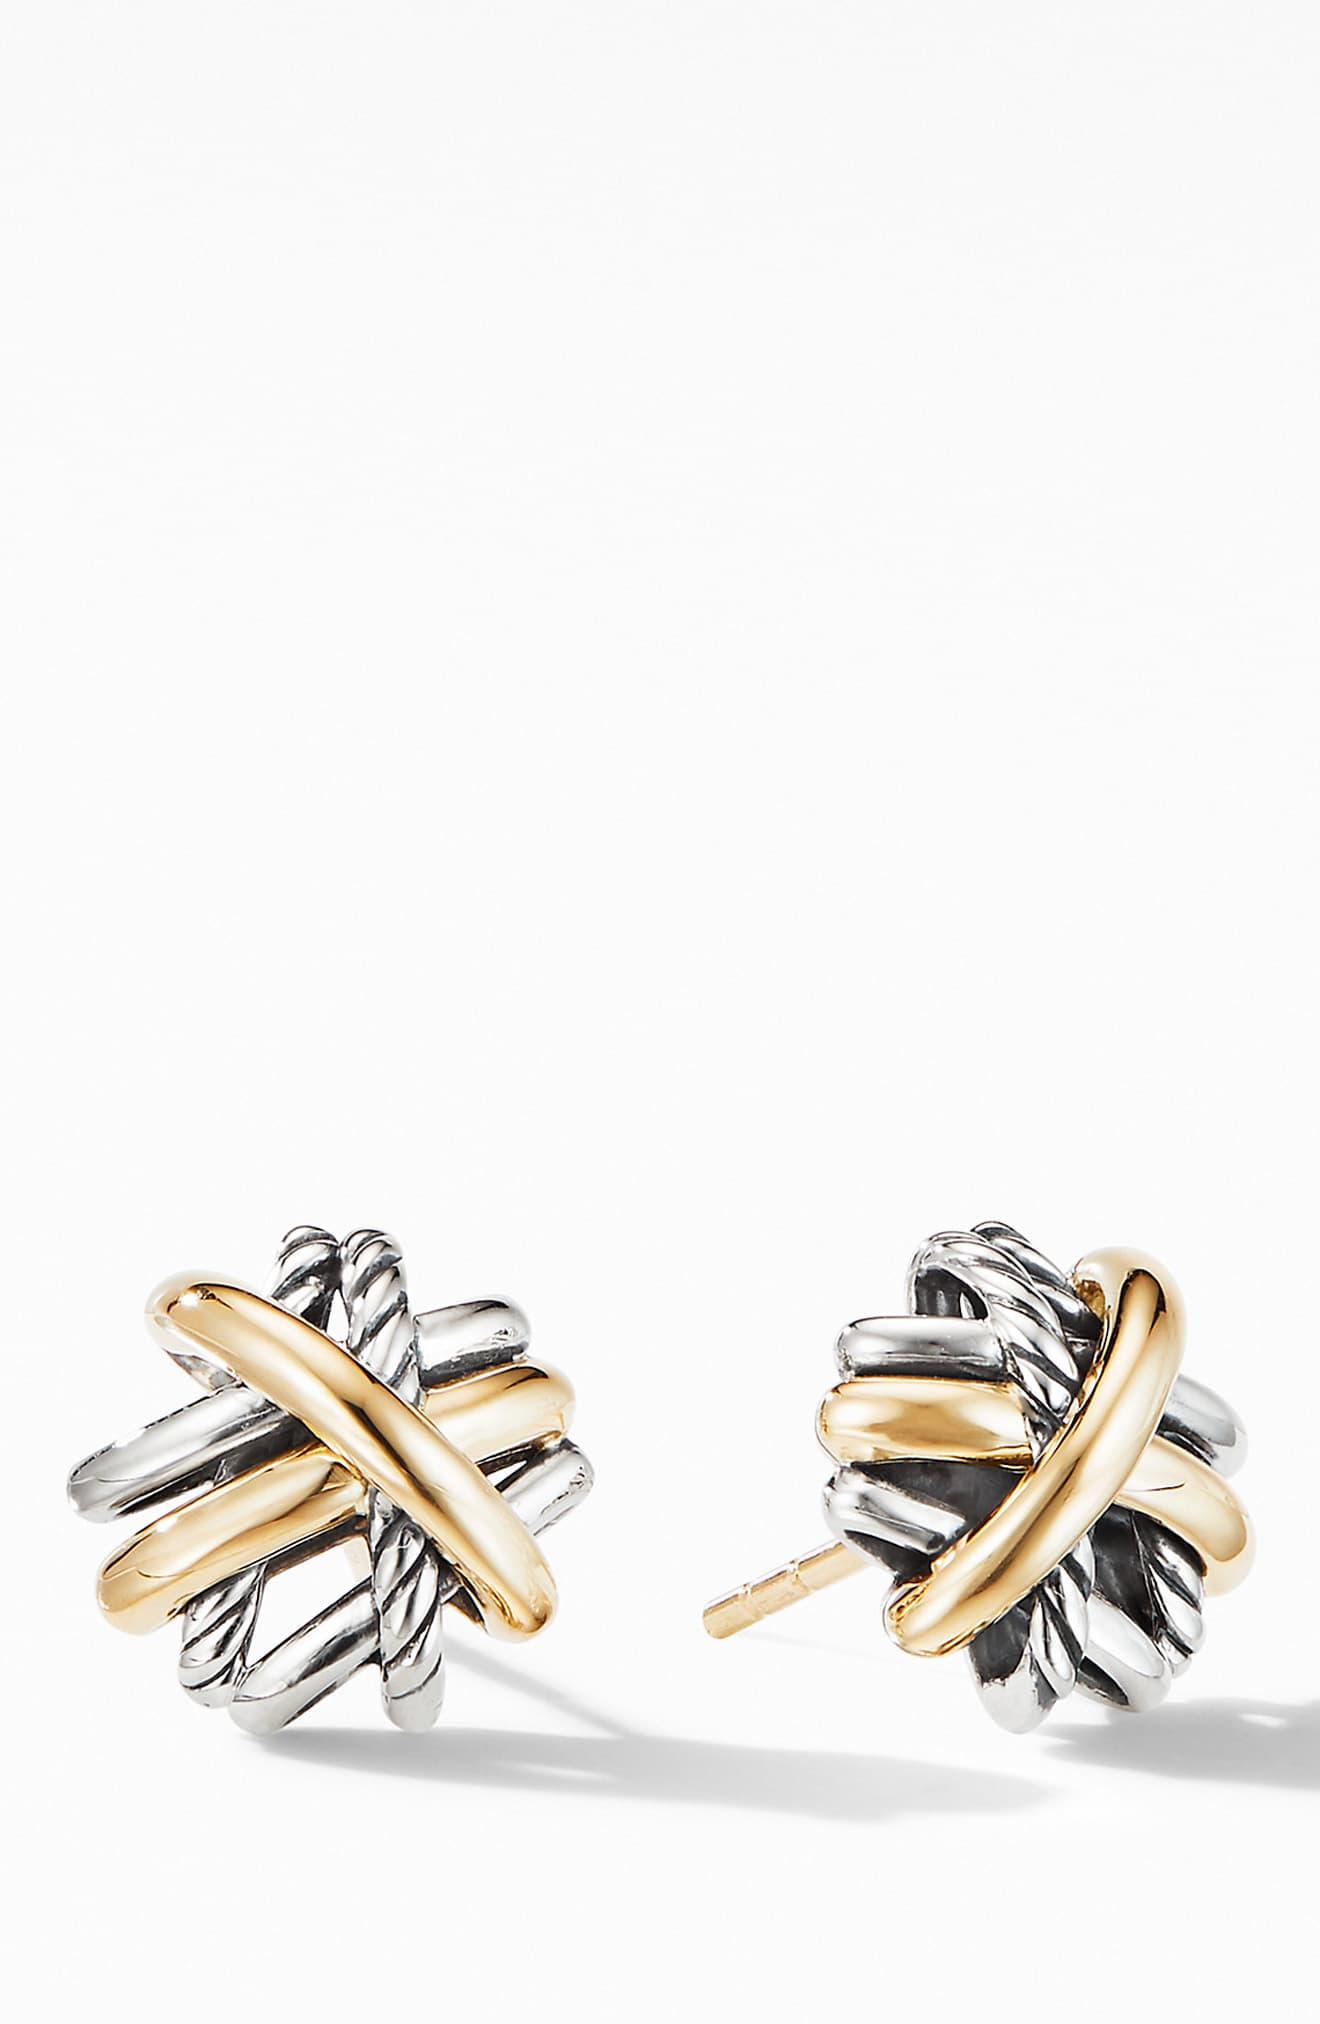 David Yurman Crossover Stud Earrings With 18k Yellow Gold in Silver ...